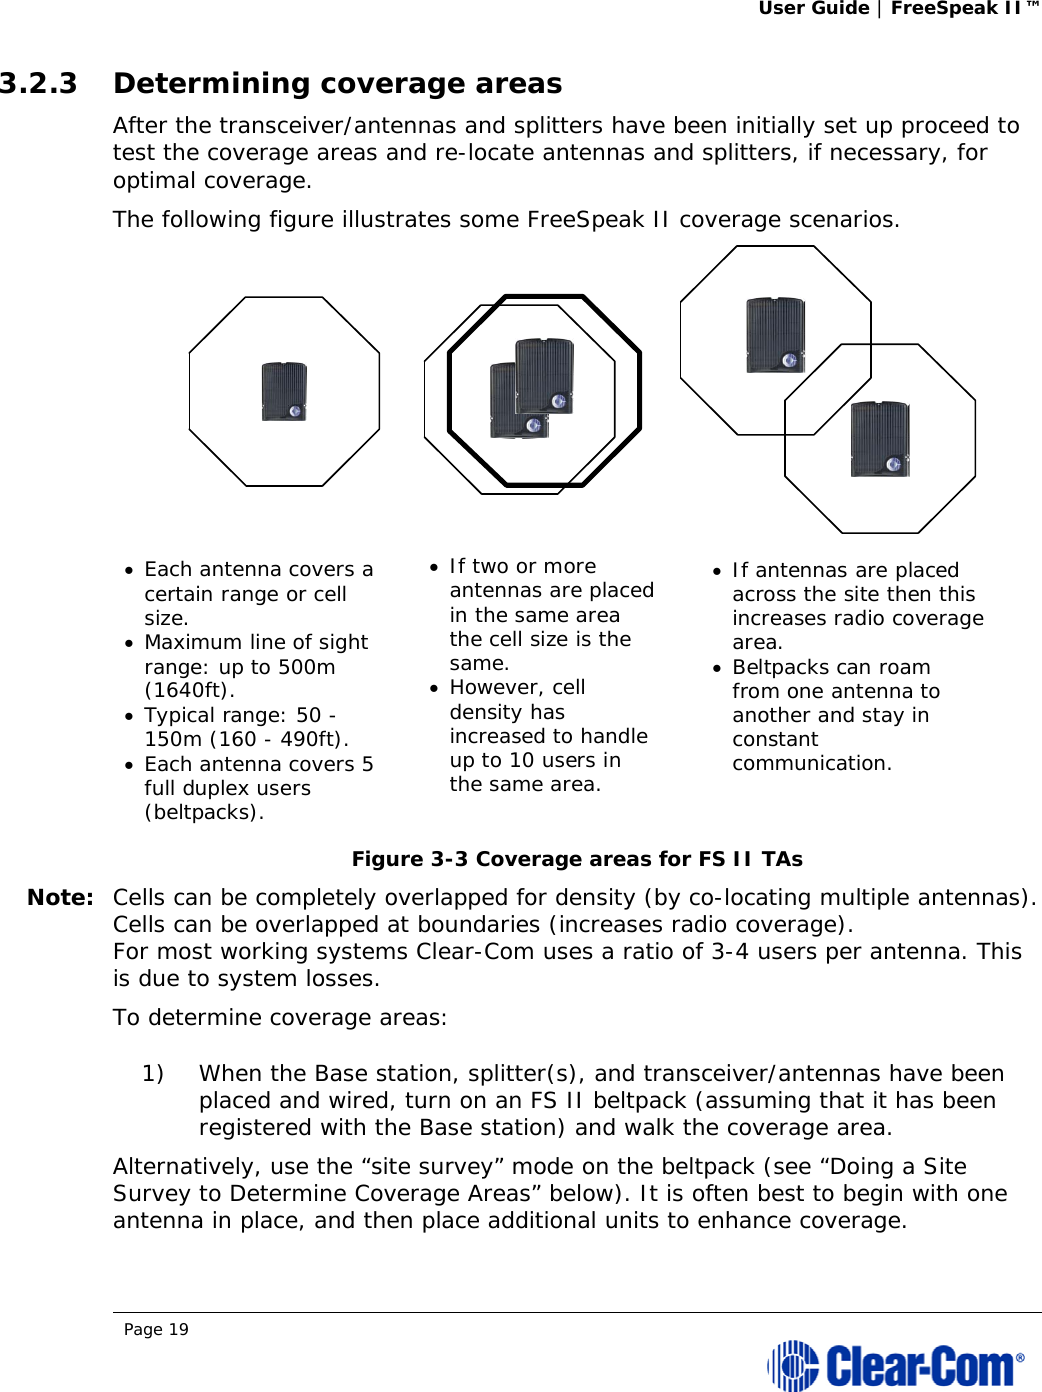 User Guide | FreeSpeak II™  Page 19  3.2.3 Determining coverage areas After the transceiver/antennas and splitters have been initially set up proceed to test the coverage areas and re-locate antennas and splitters, if necessary, for optimal coverage. The following figure illustrates some FreeSpeak II coverage scenarios.  Figure 3-3 Coverage areas for FS II TAs Note: Cells can be completely overlapped for density (by co-locating multiple antennas). Cells can be overlapped at boundaries (increases radio coverage). For most working systems Clear-Com uses a ratio of 3-4 users per antenna. This is due to system losses. To determine coverage areas:  1) When the Base station, splitter(s), and transceiver/antennas have been placed and wired, turn on an FS II beltpack (assuming that it has been registered with the Base station) and walk the coverage area. Alternatively, use the “site survey” mode on the beltpack (see “Doing a Site Survey to Determine Coverage Areas” below). It is often best to begin with one antenna in place, and then place additional units to enhance coverage.   Each antenna covers a certain range or cell size. Maximum line of sight range: up to 500m (1640ft).  Typical range: 50 - 150m (160 - 490ft).  Each antenna covers 5 full duplex users (beltpacks). If two or more antennas are placed in the same area the cell size is the same. However, cell density has increased to handle up to 10 users in the same area. If antennas are placed across the site then this increases radio coverage area. Beltpacks can roam from one antenna to another and stay in constant communication. 